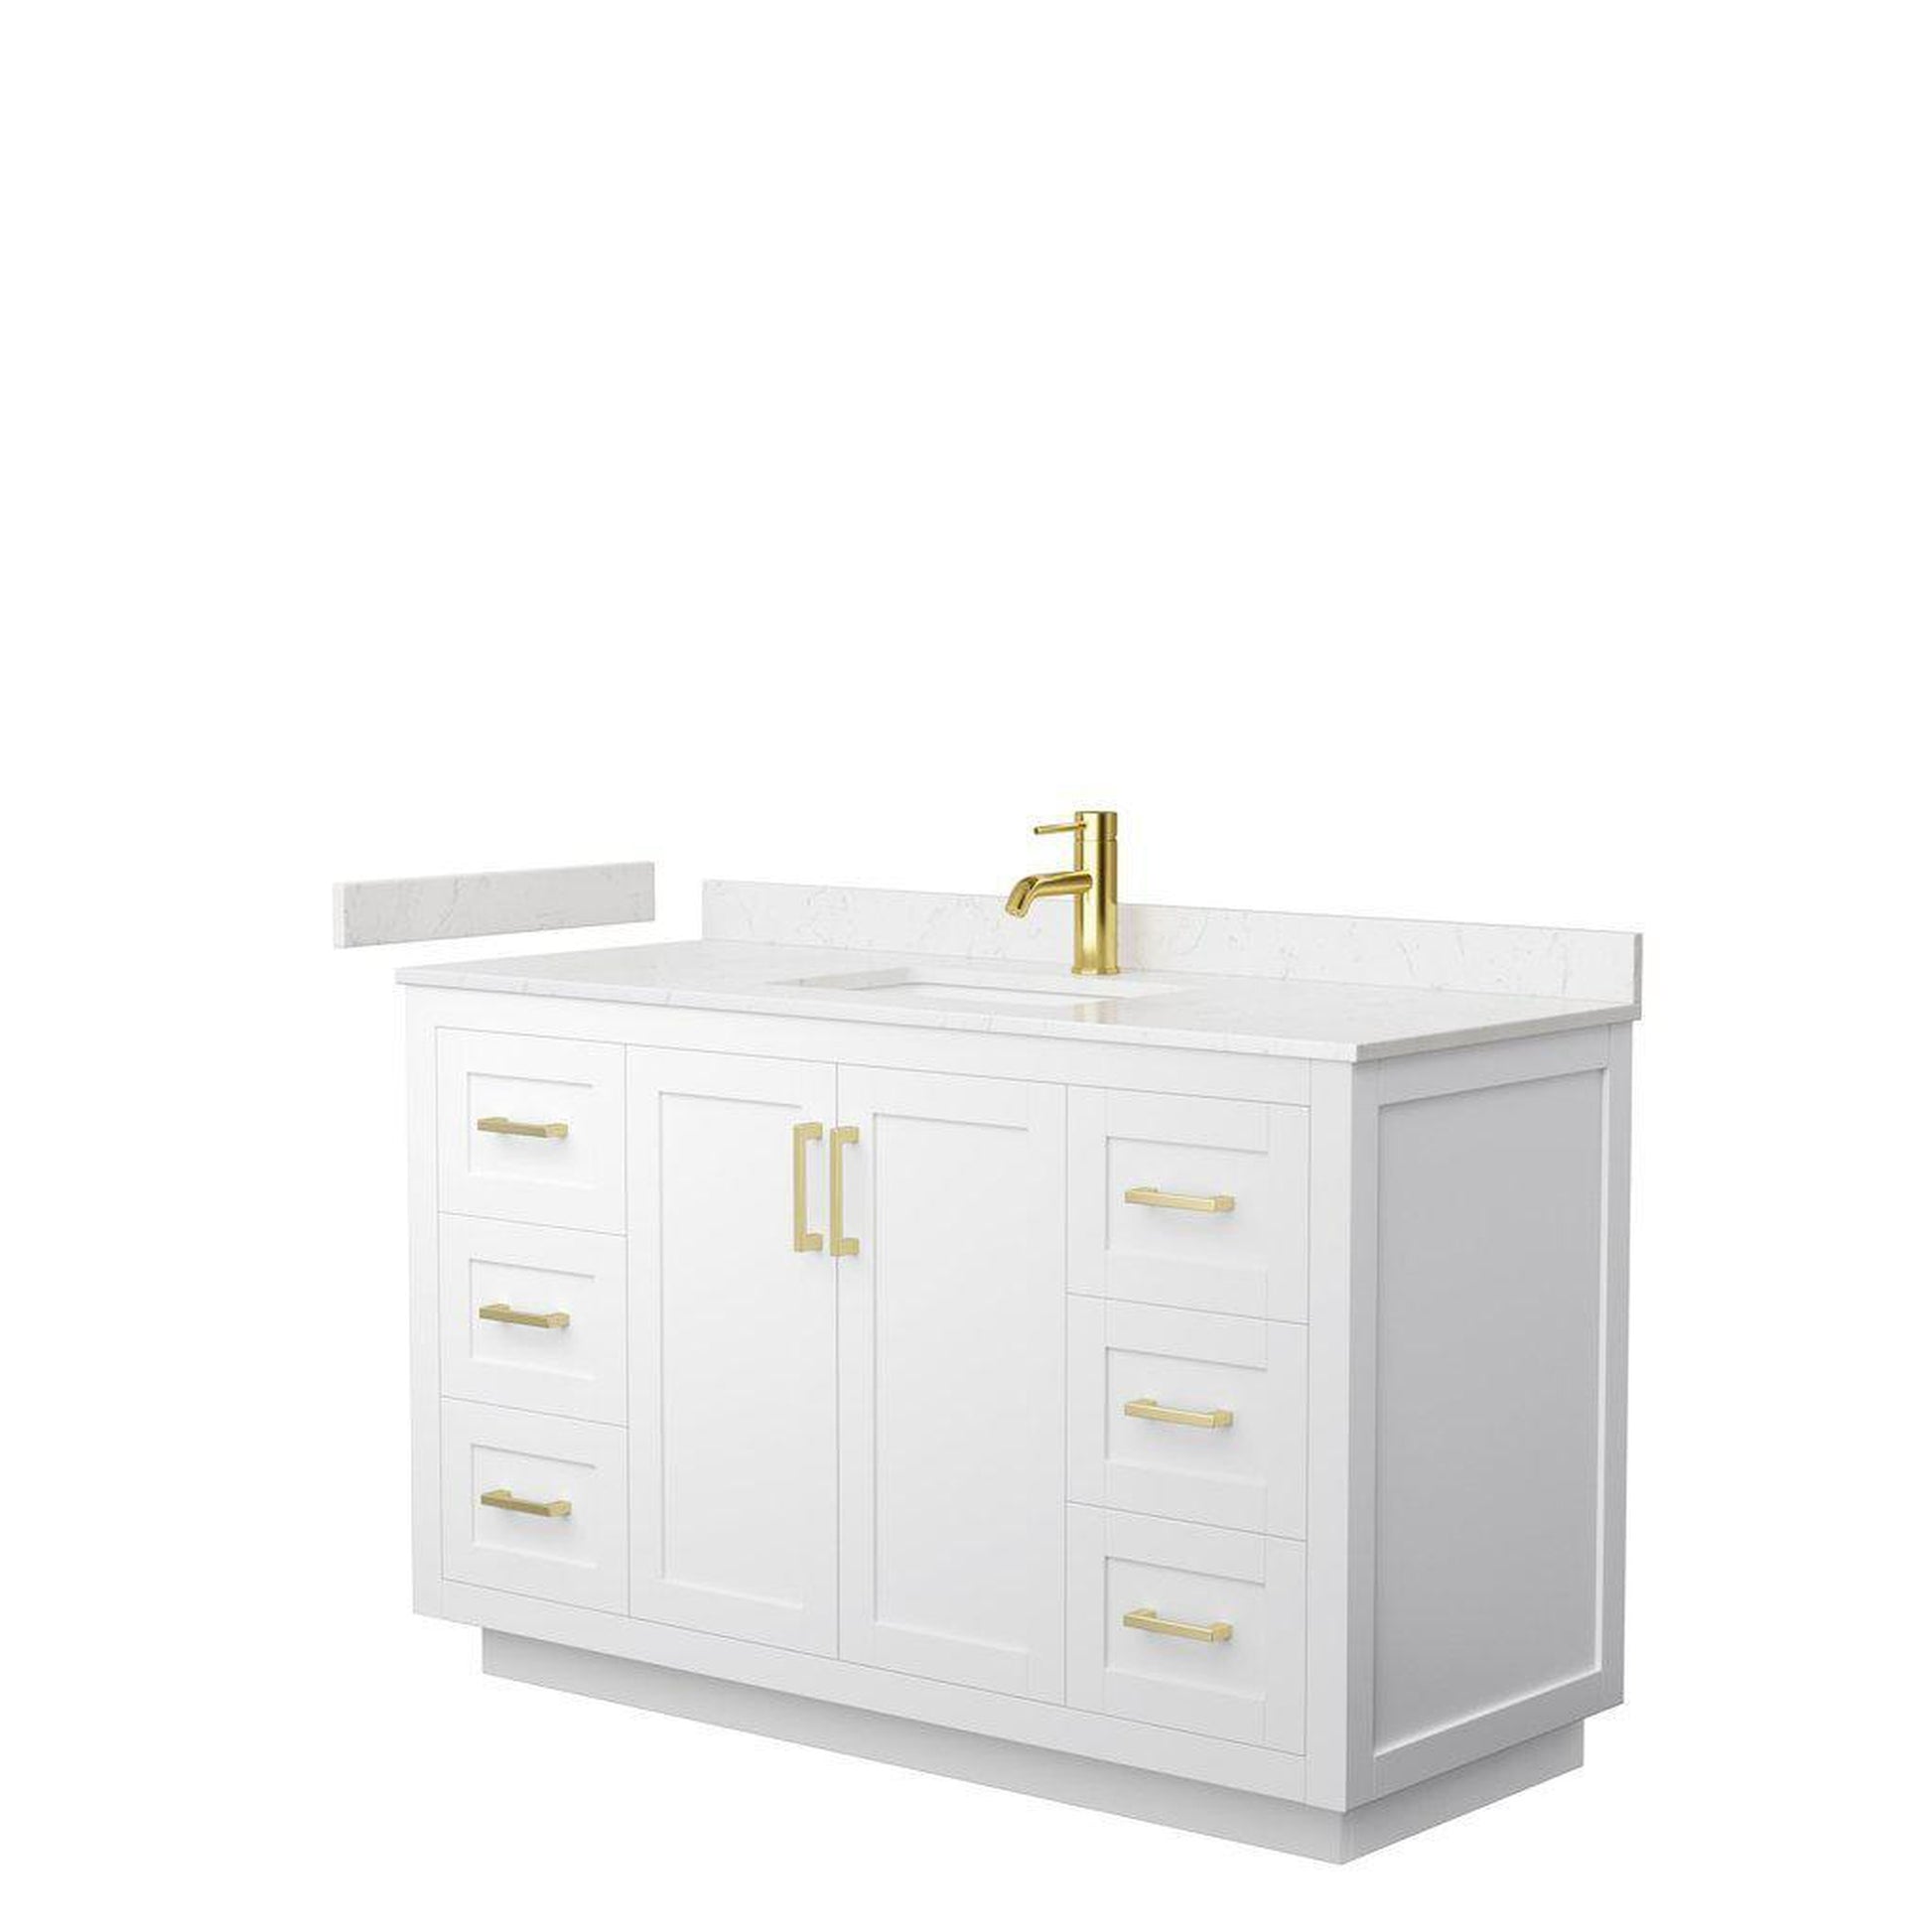 Wyndham Collection Miranda 54" Single Bathroom White Vanity Set With Light-Vein Carrara Cultured Marble Countertop, Undermount Square Sink, And Brushed Gold Trim